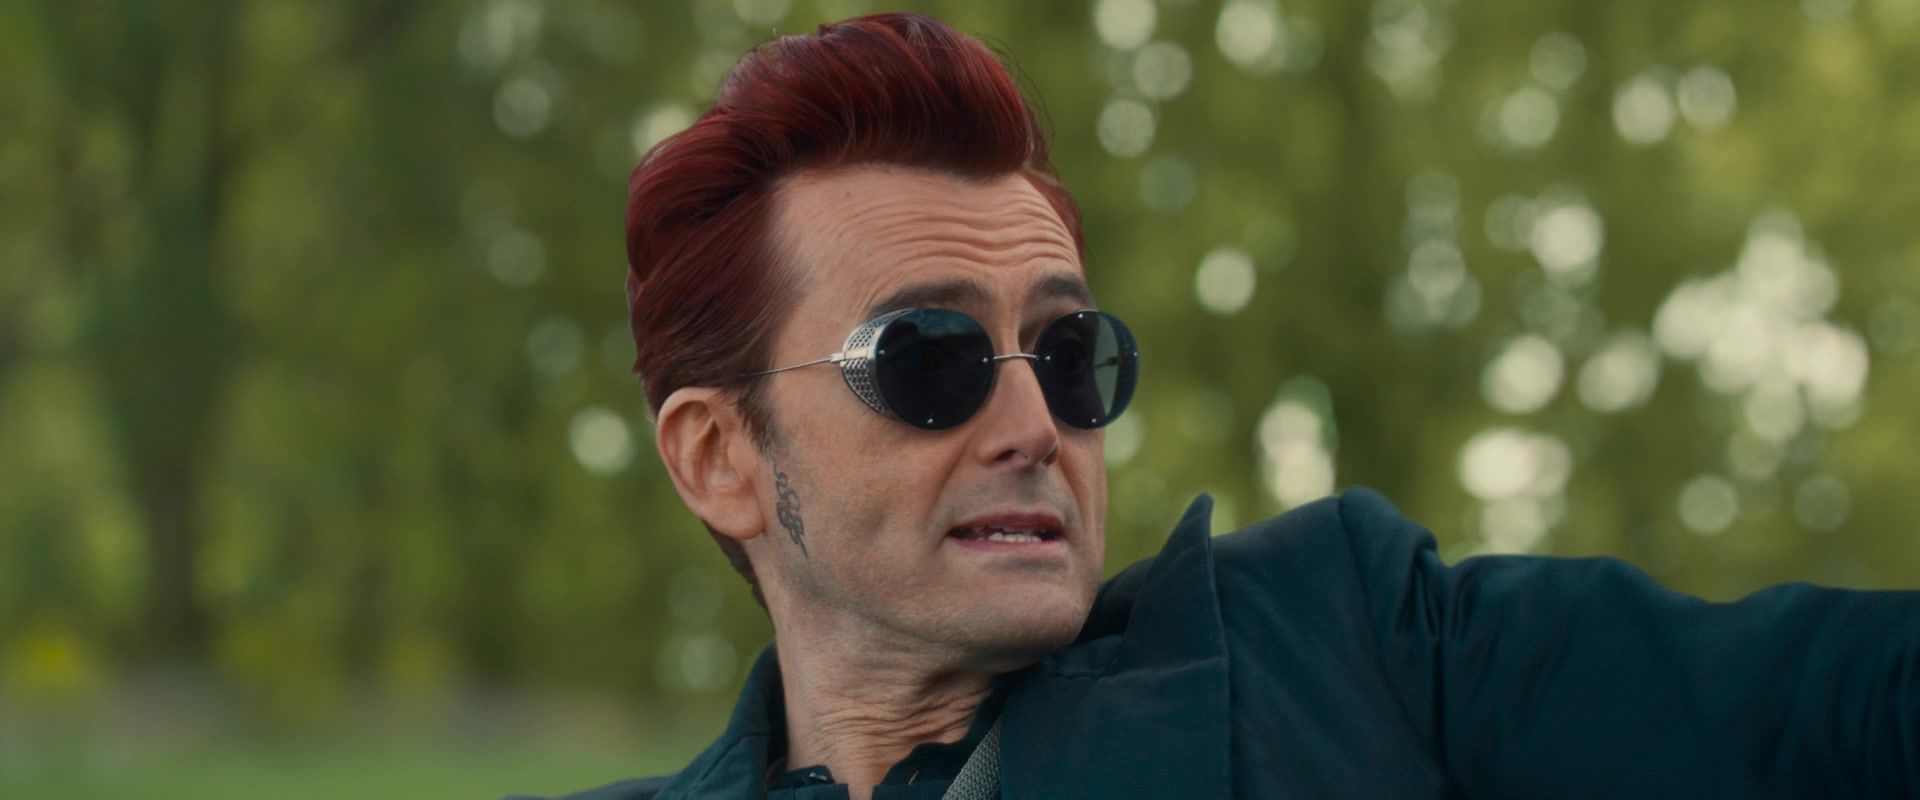 Worn on Good Omens TV Show - Round Metal Sunglasses Worn by David Tennant as Crowley